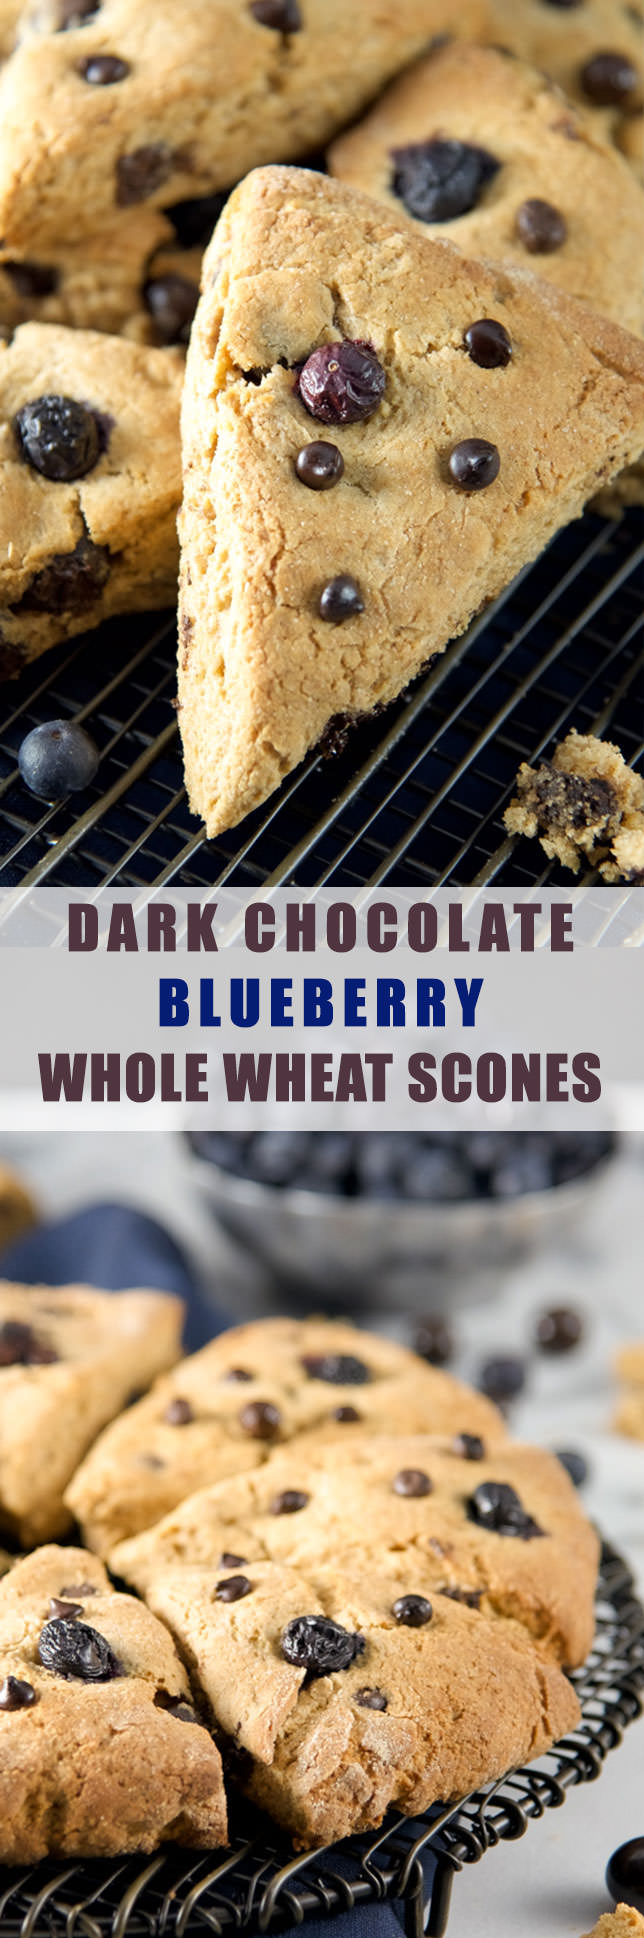 Dark Chocolate Blueberry Whole Wheat Scones are chewy, filled with whole grains, chocolate and juicy blueberries!